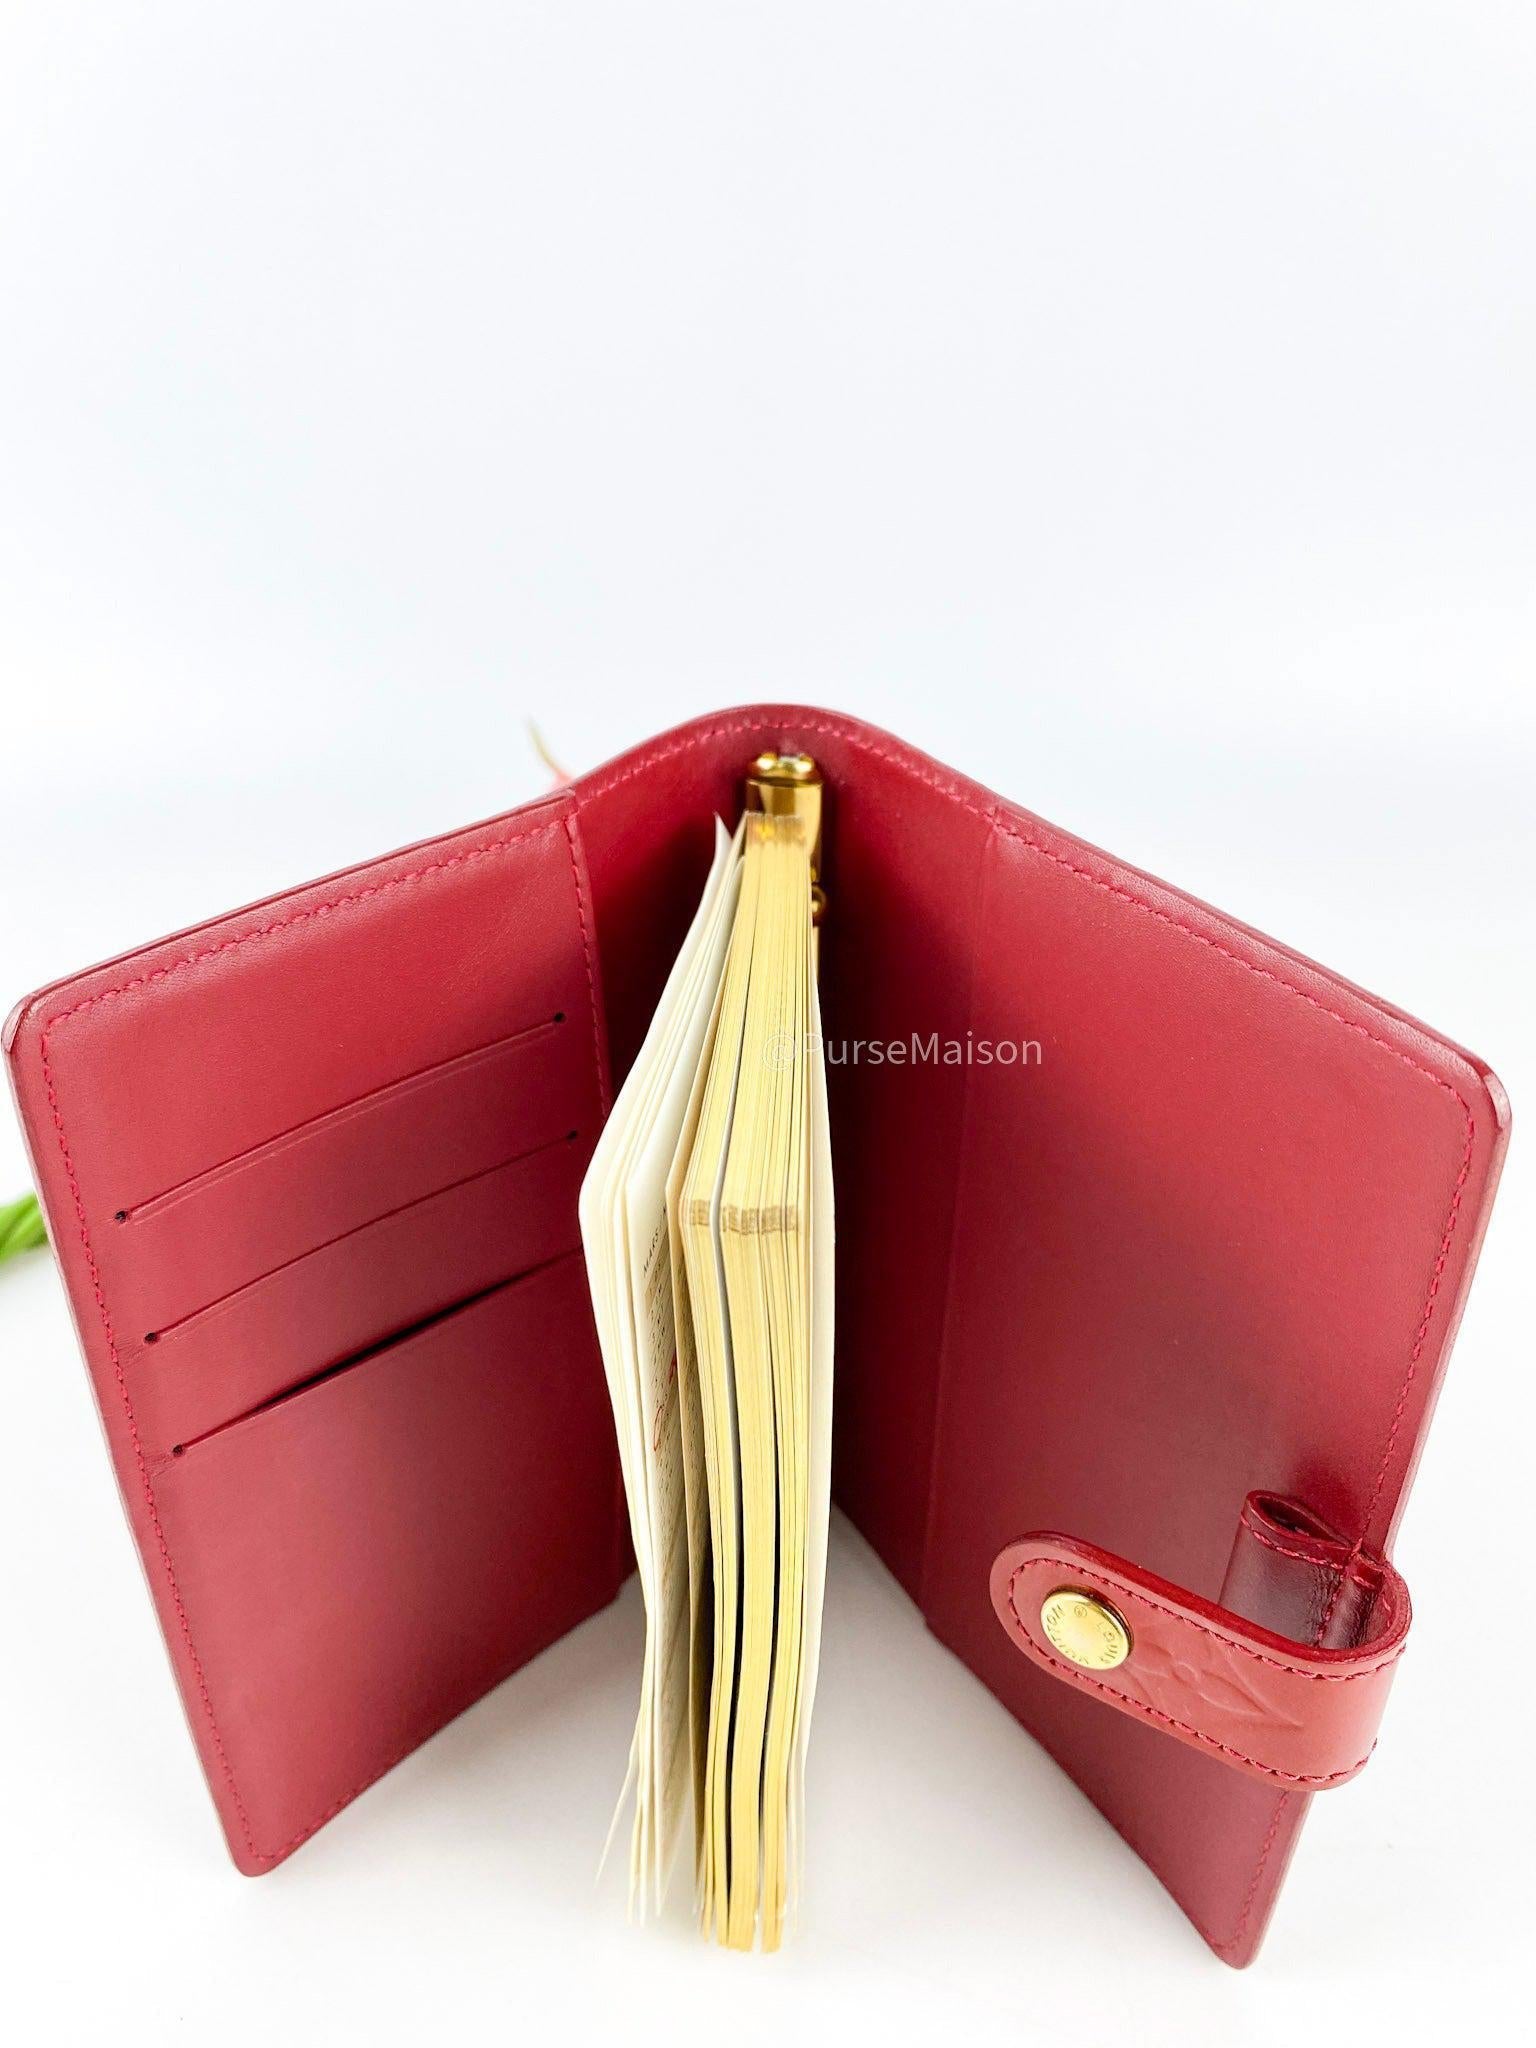 Louis Vuitton Pomme D' Amour Agenda PM Red Patent Leather